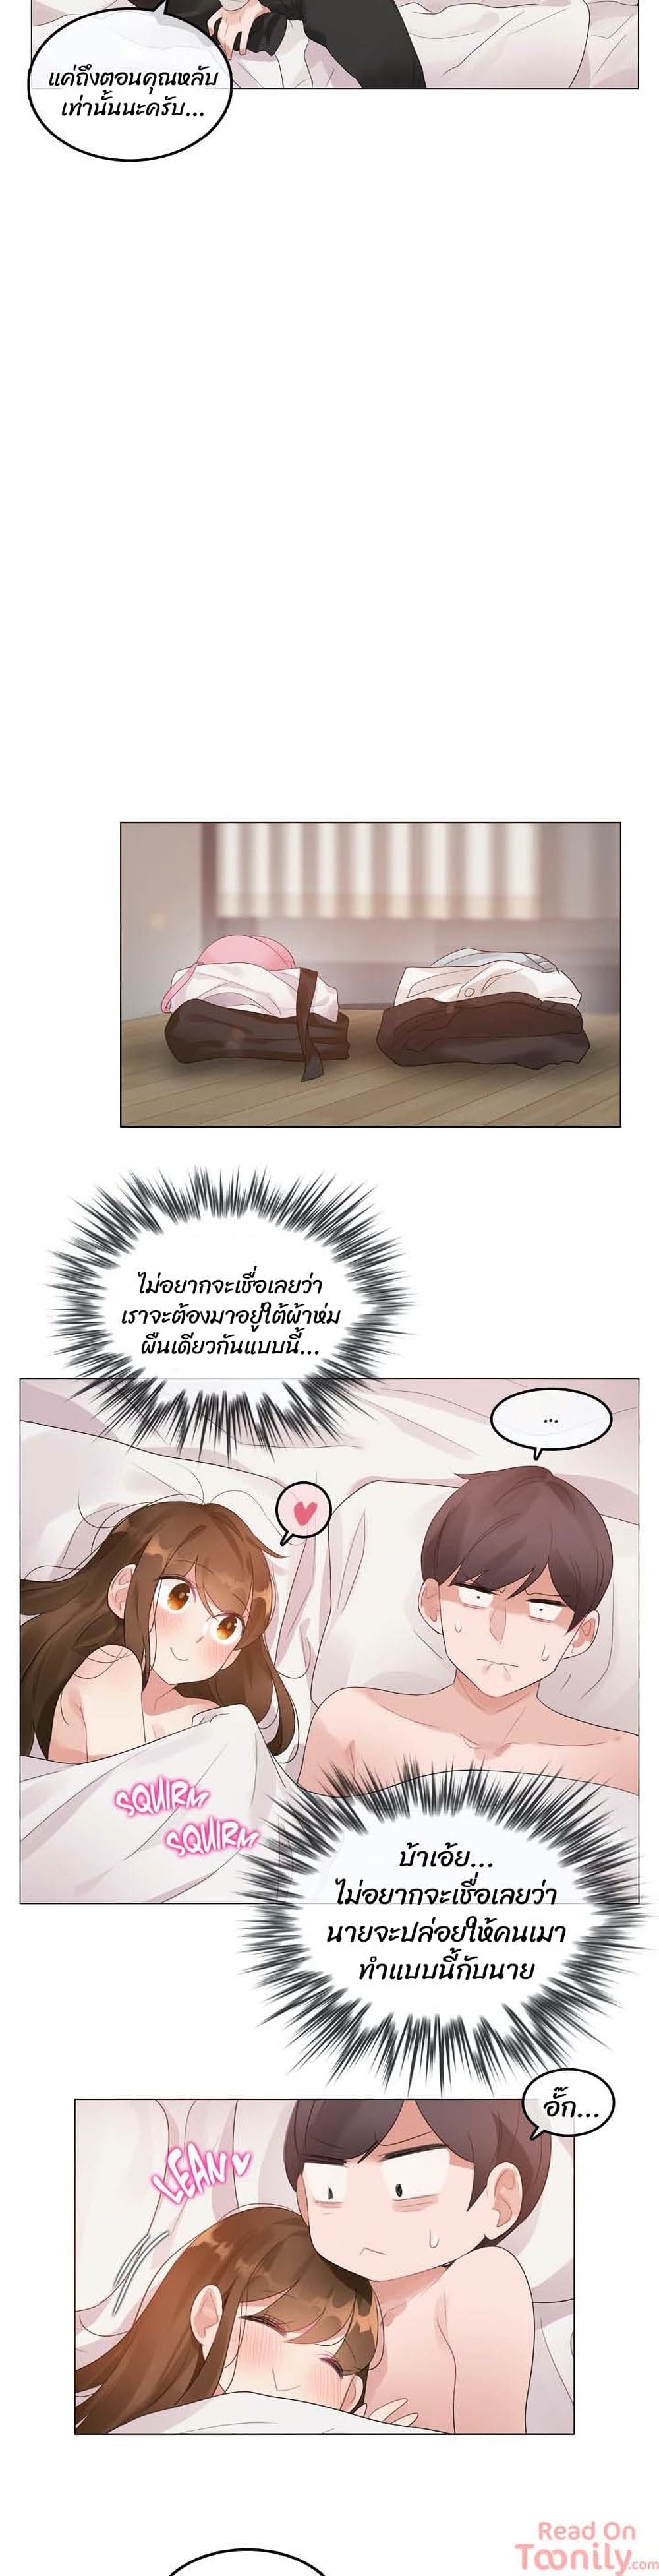 A Pervert’s Daily Life15